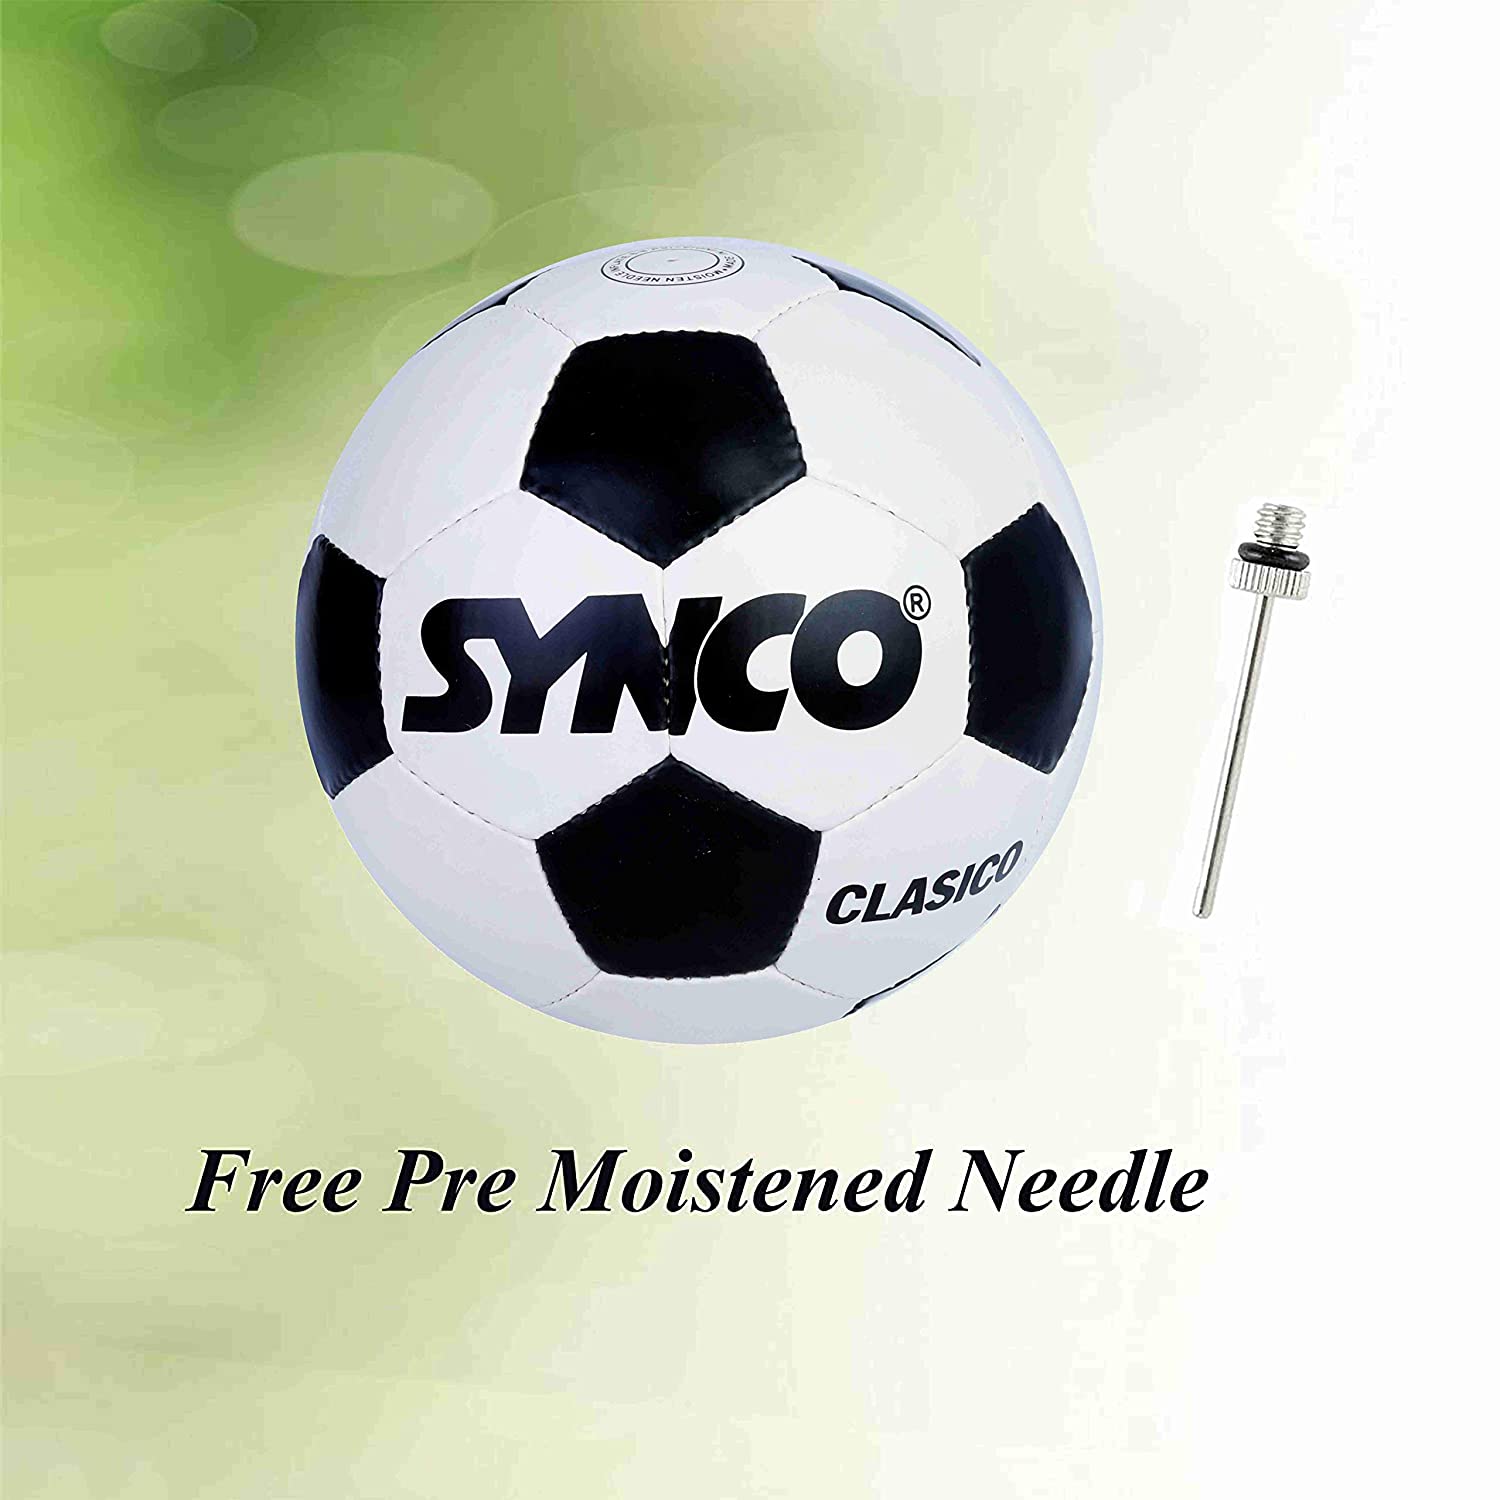 SYNCO World Cup Clasico <br>Rubber Football/Soccer Ball <br>Size-5 White/Black - 4